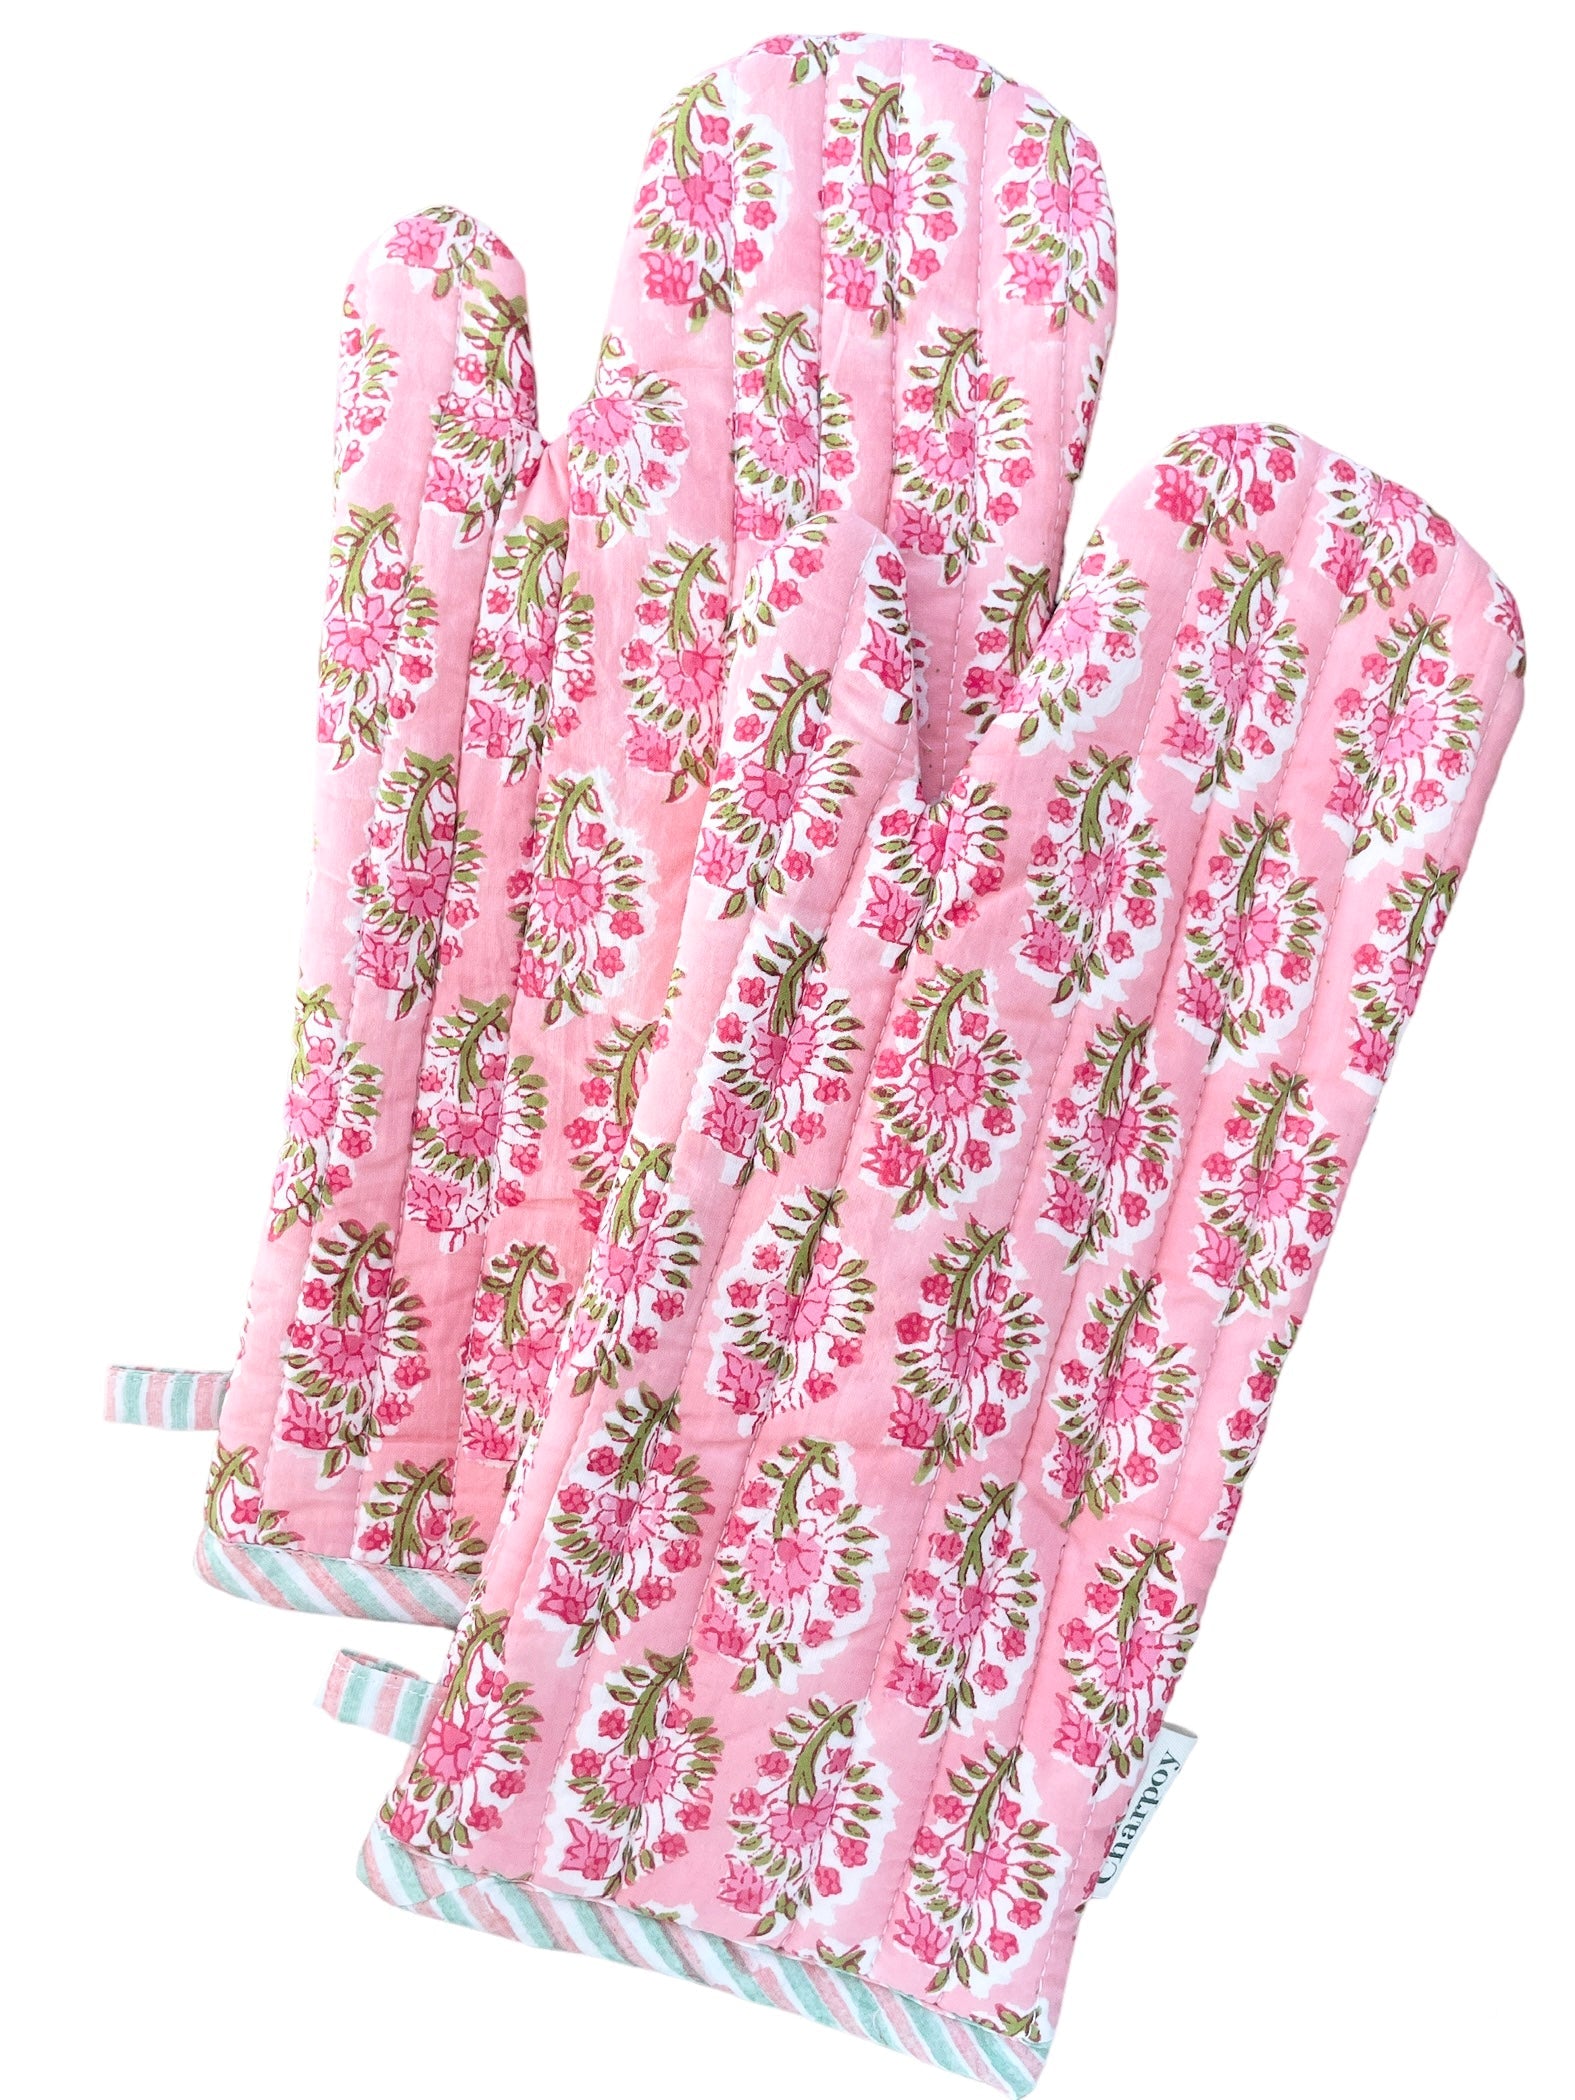 Peach Oven Gloves The Charpoy